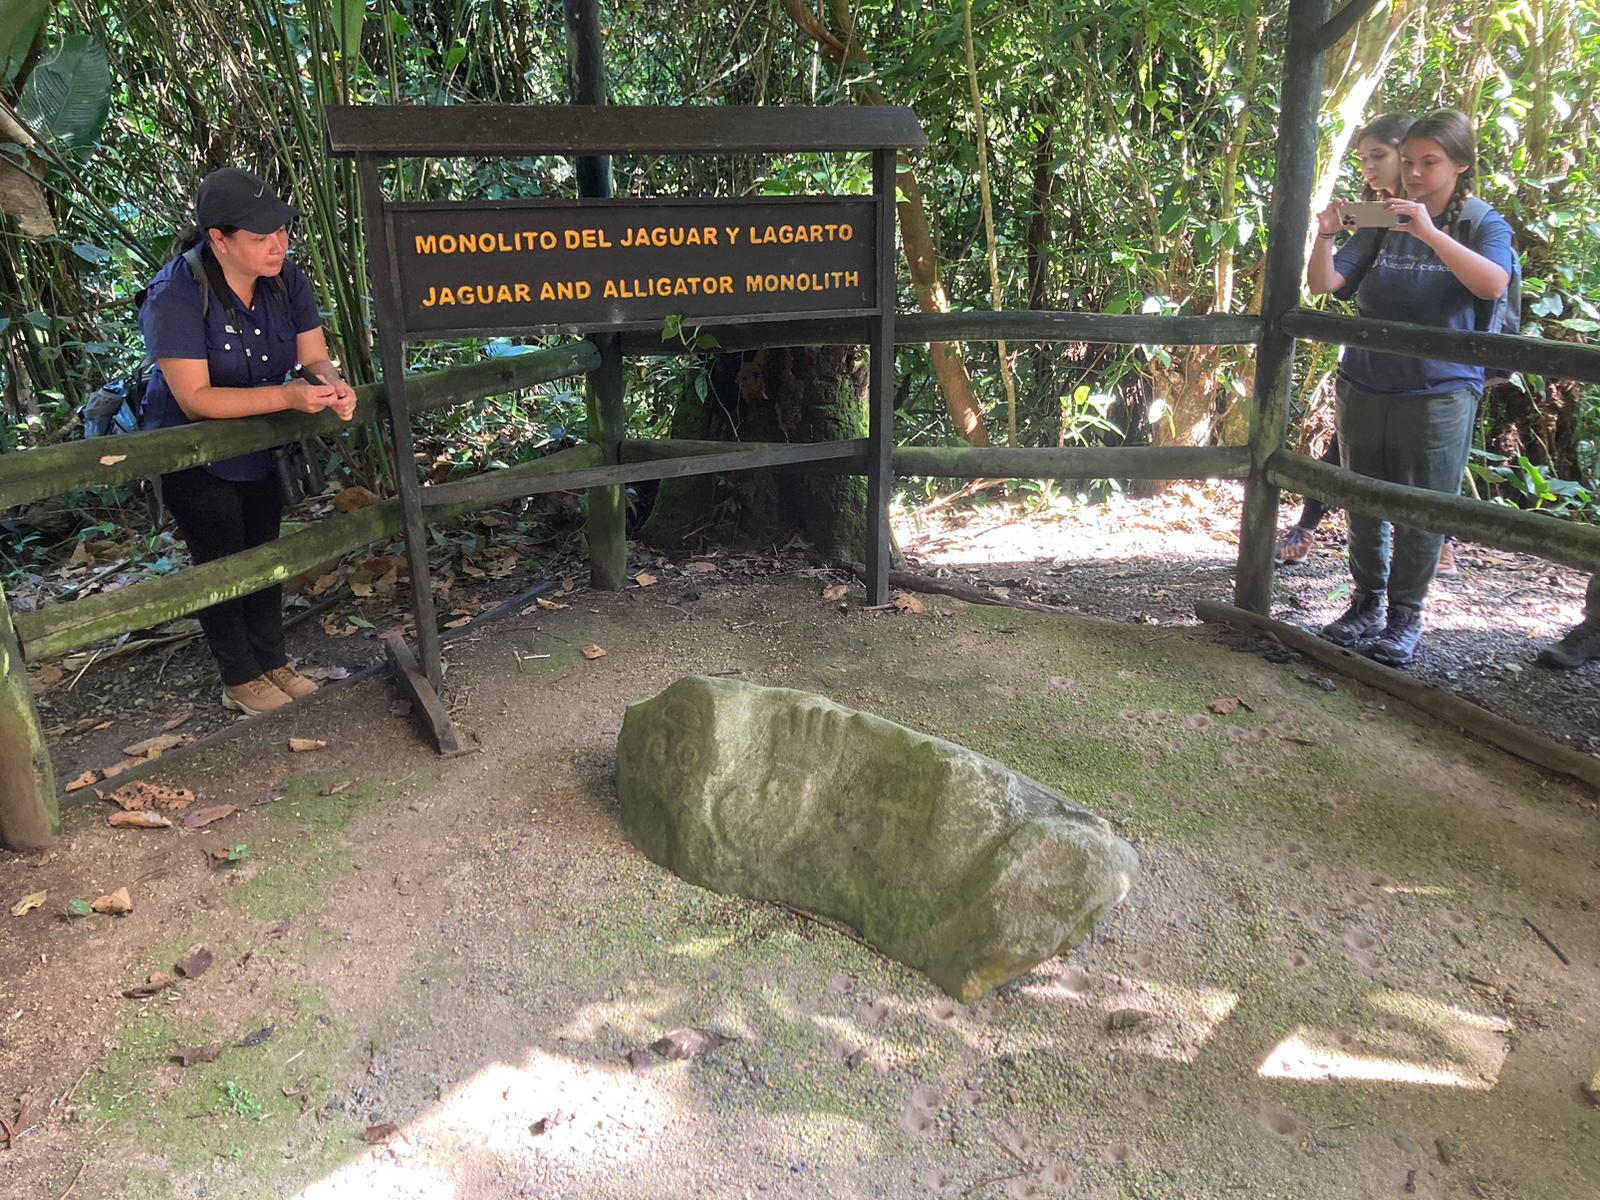 Monolithic carving of jaguar and alligator at Guayabo National Monument, Costa Rica